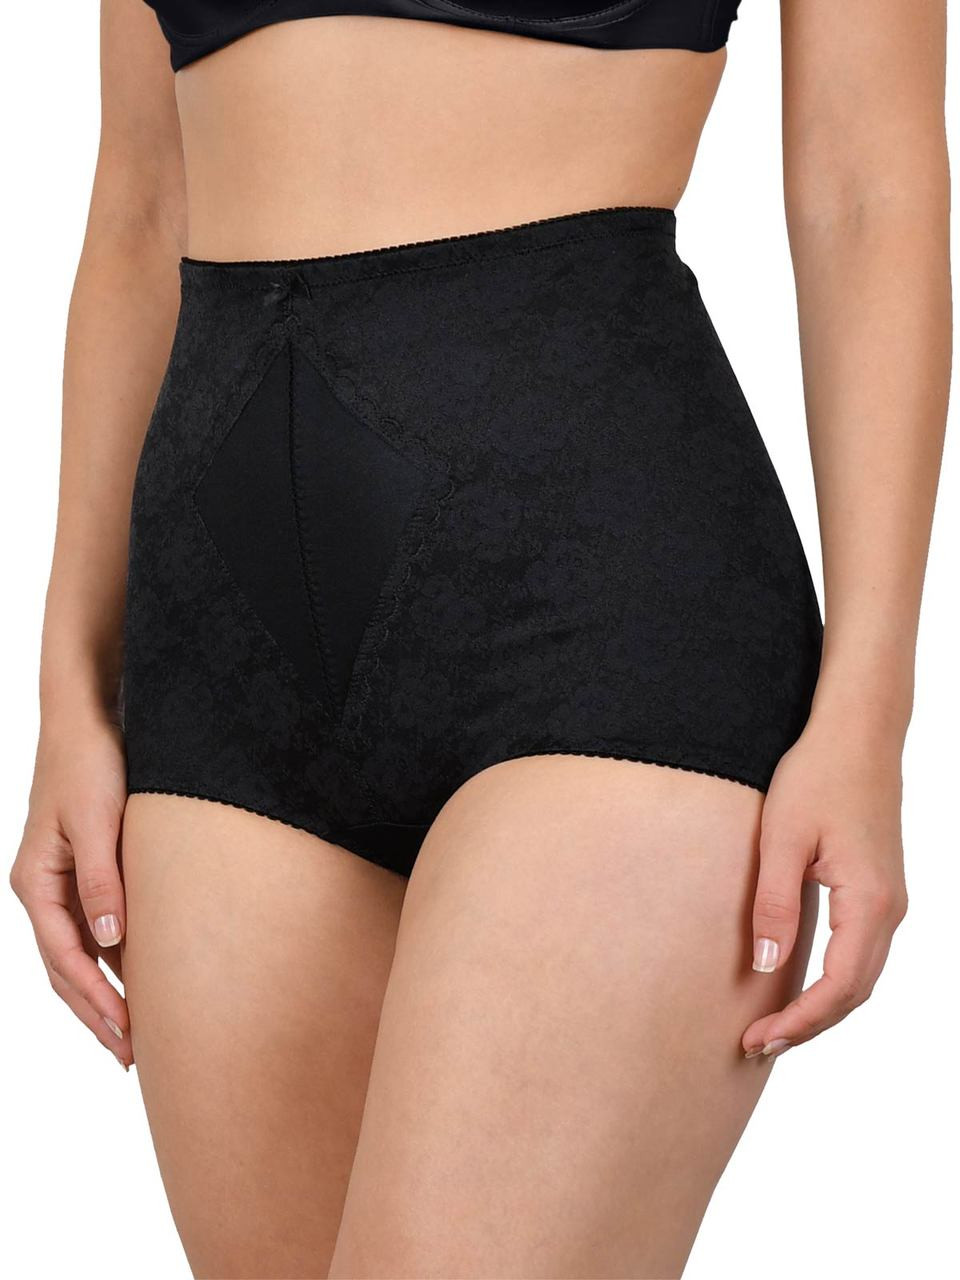 Summer panty girdle - Shaping panty girdle with extra high waist